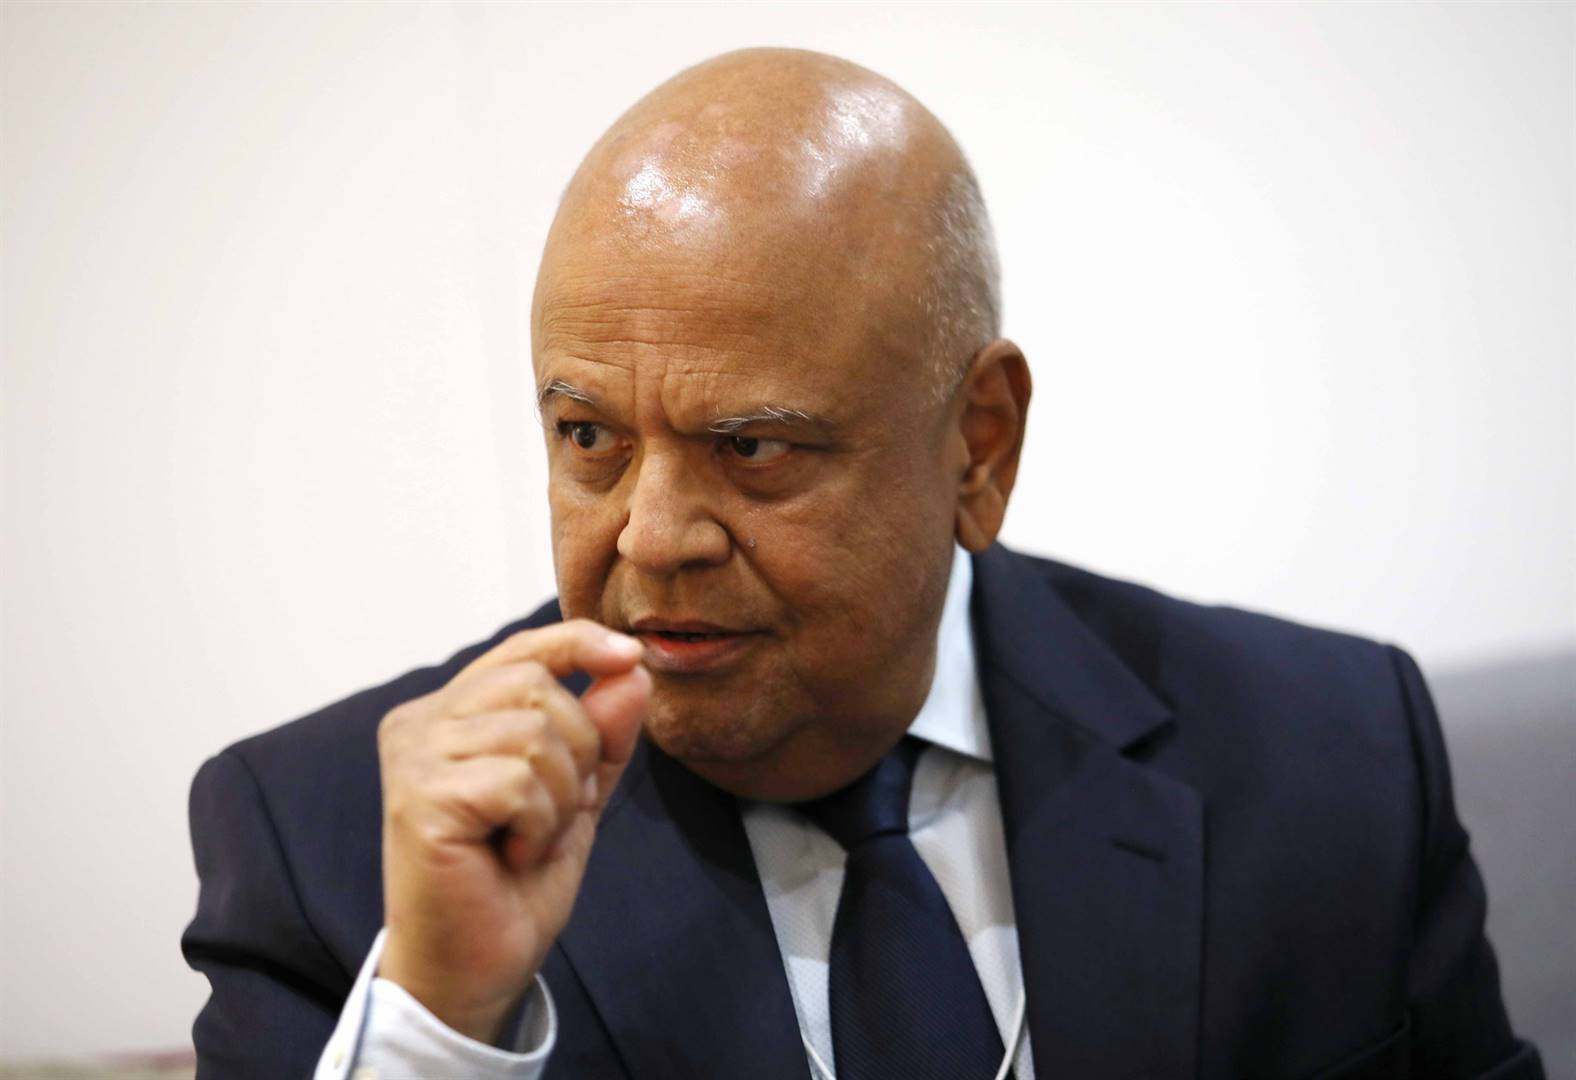 According to DA MP Alf Lees, it would create a “dangerous precedent” if minister Pravin Gordhan were allowed to refuse to provide information about state entities. 